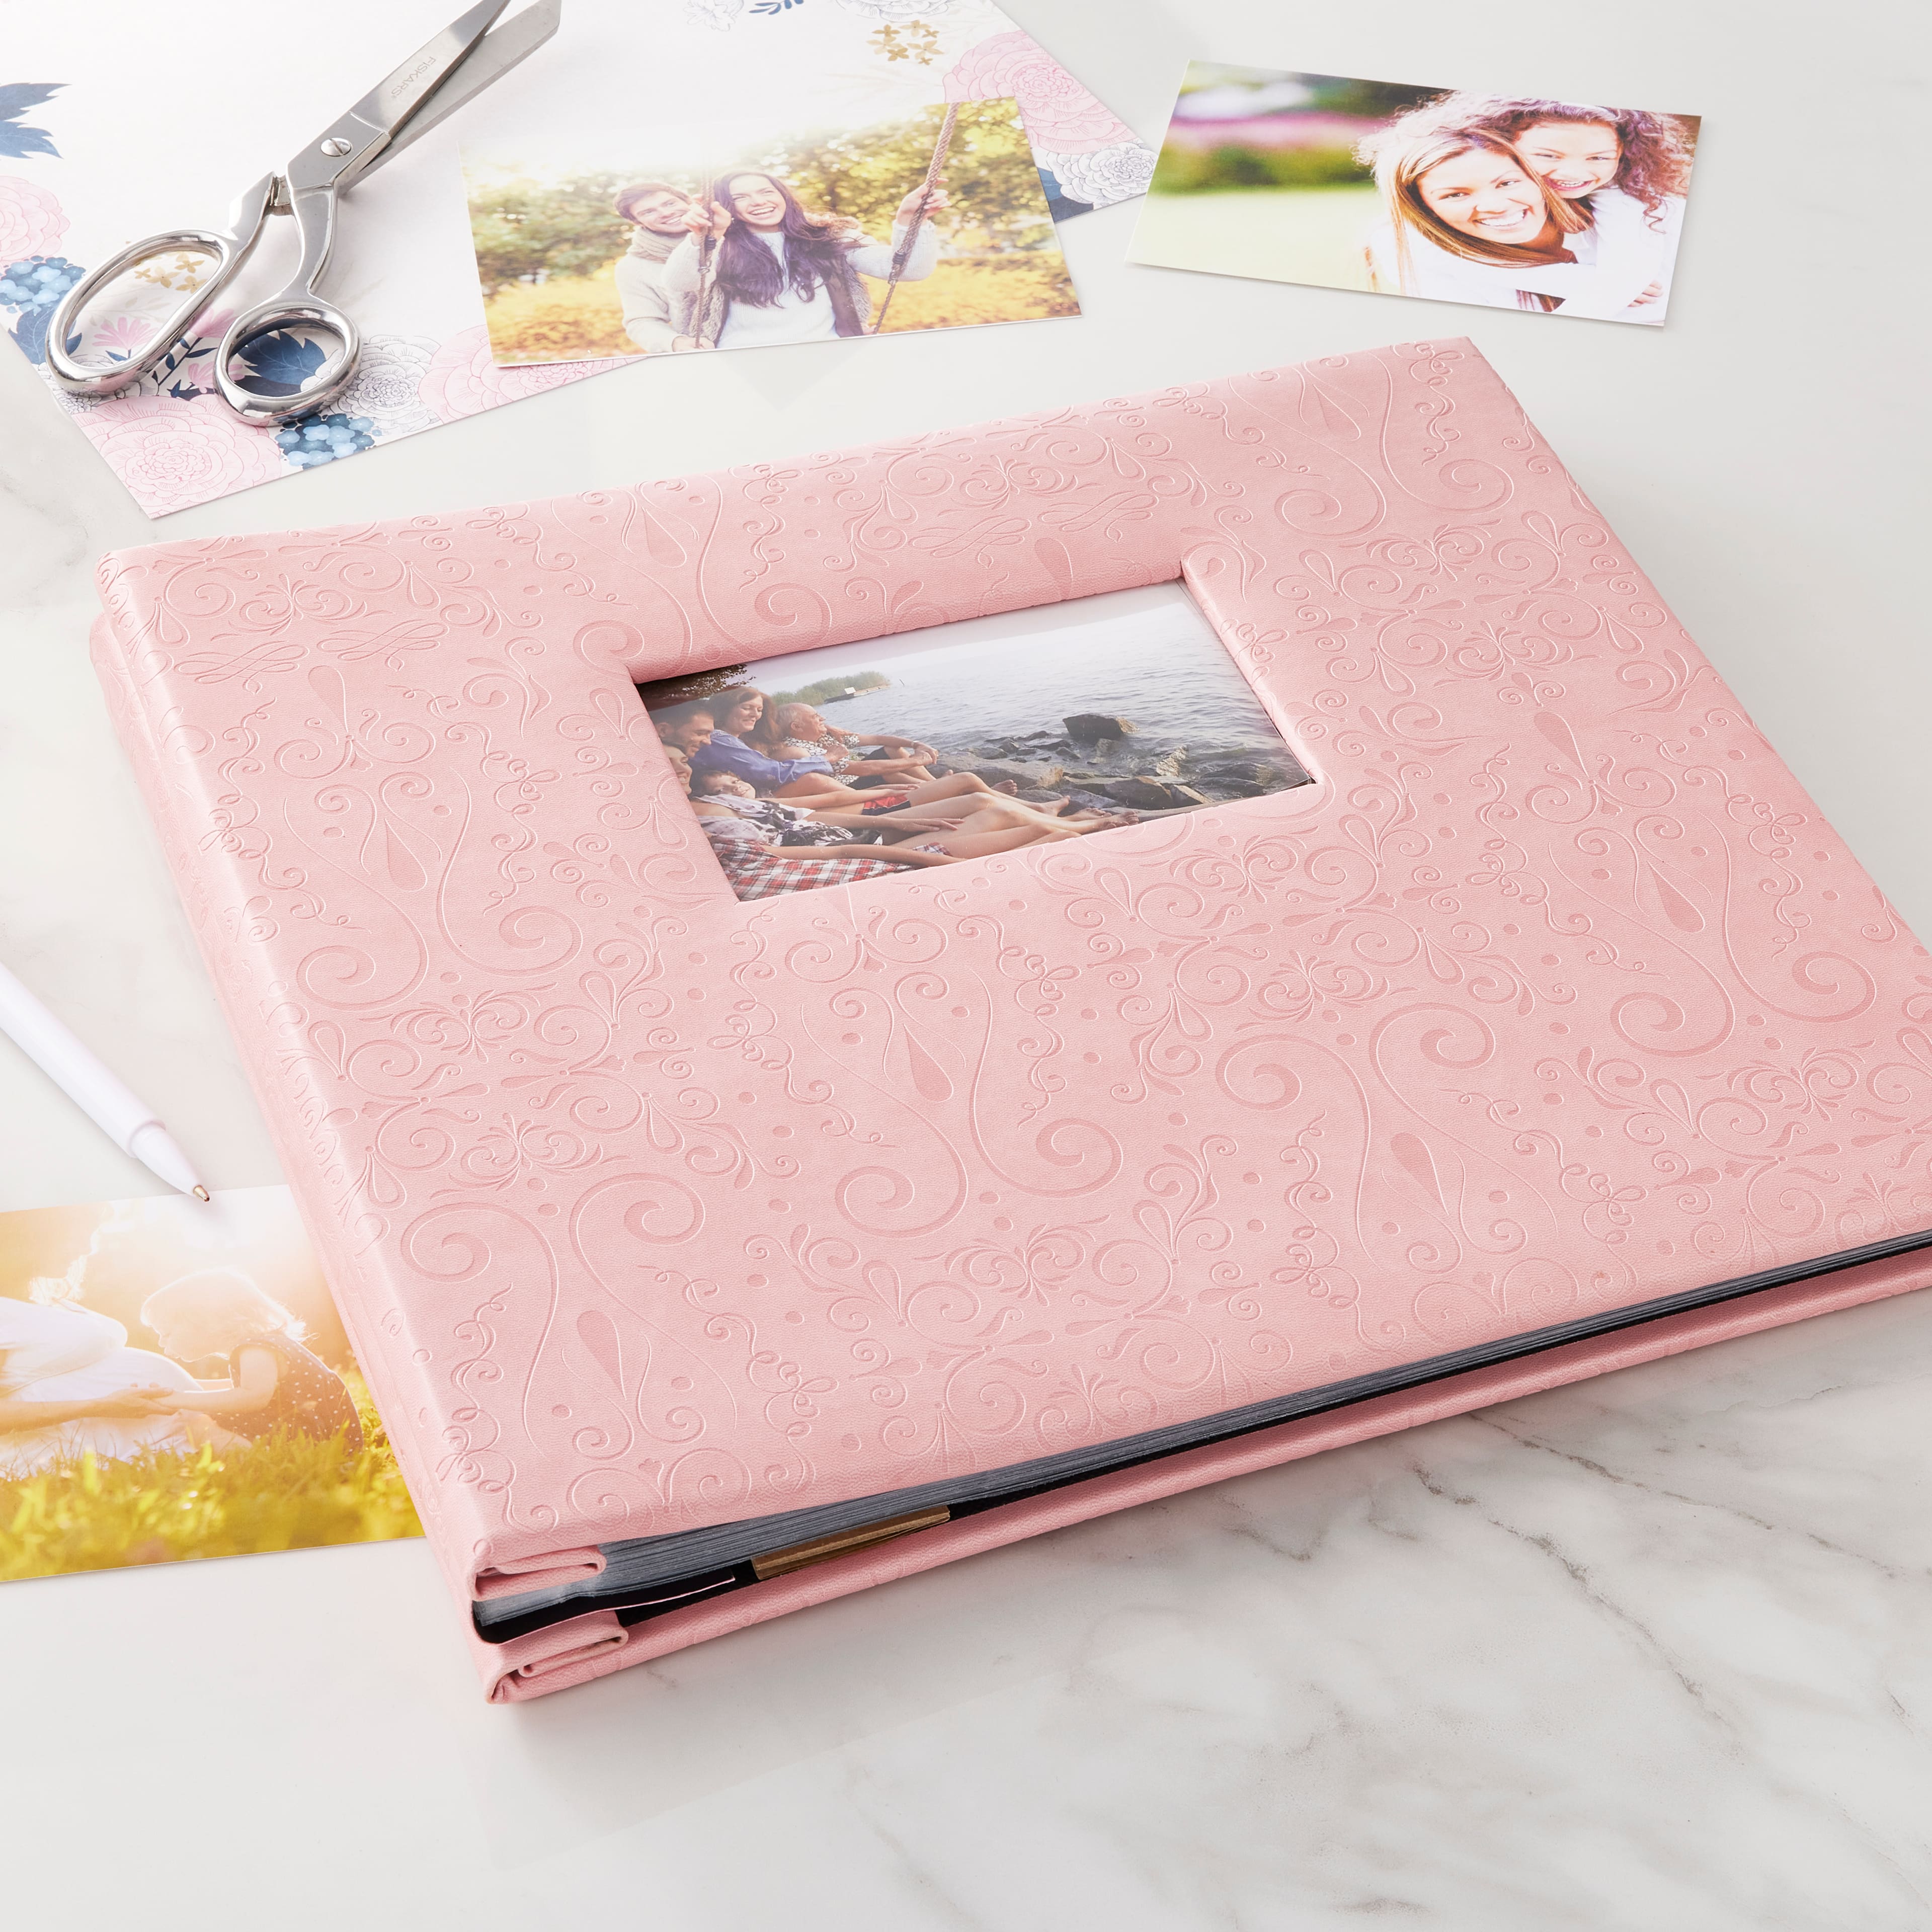 6 Pack: Pink Mega Scrapbook Album, 12&#x22; x 12&#x22; by Recollections&#xAE;